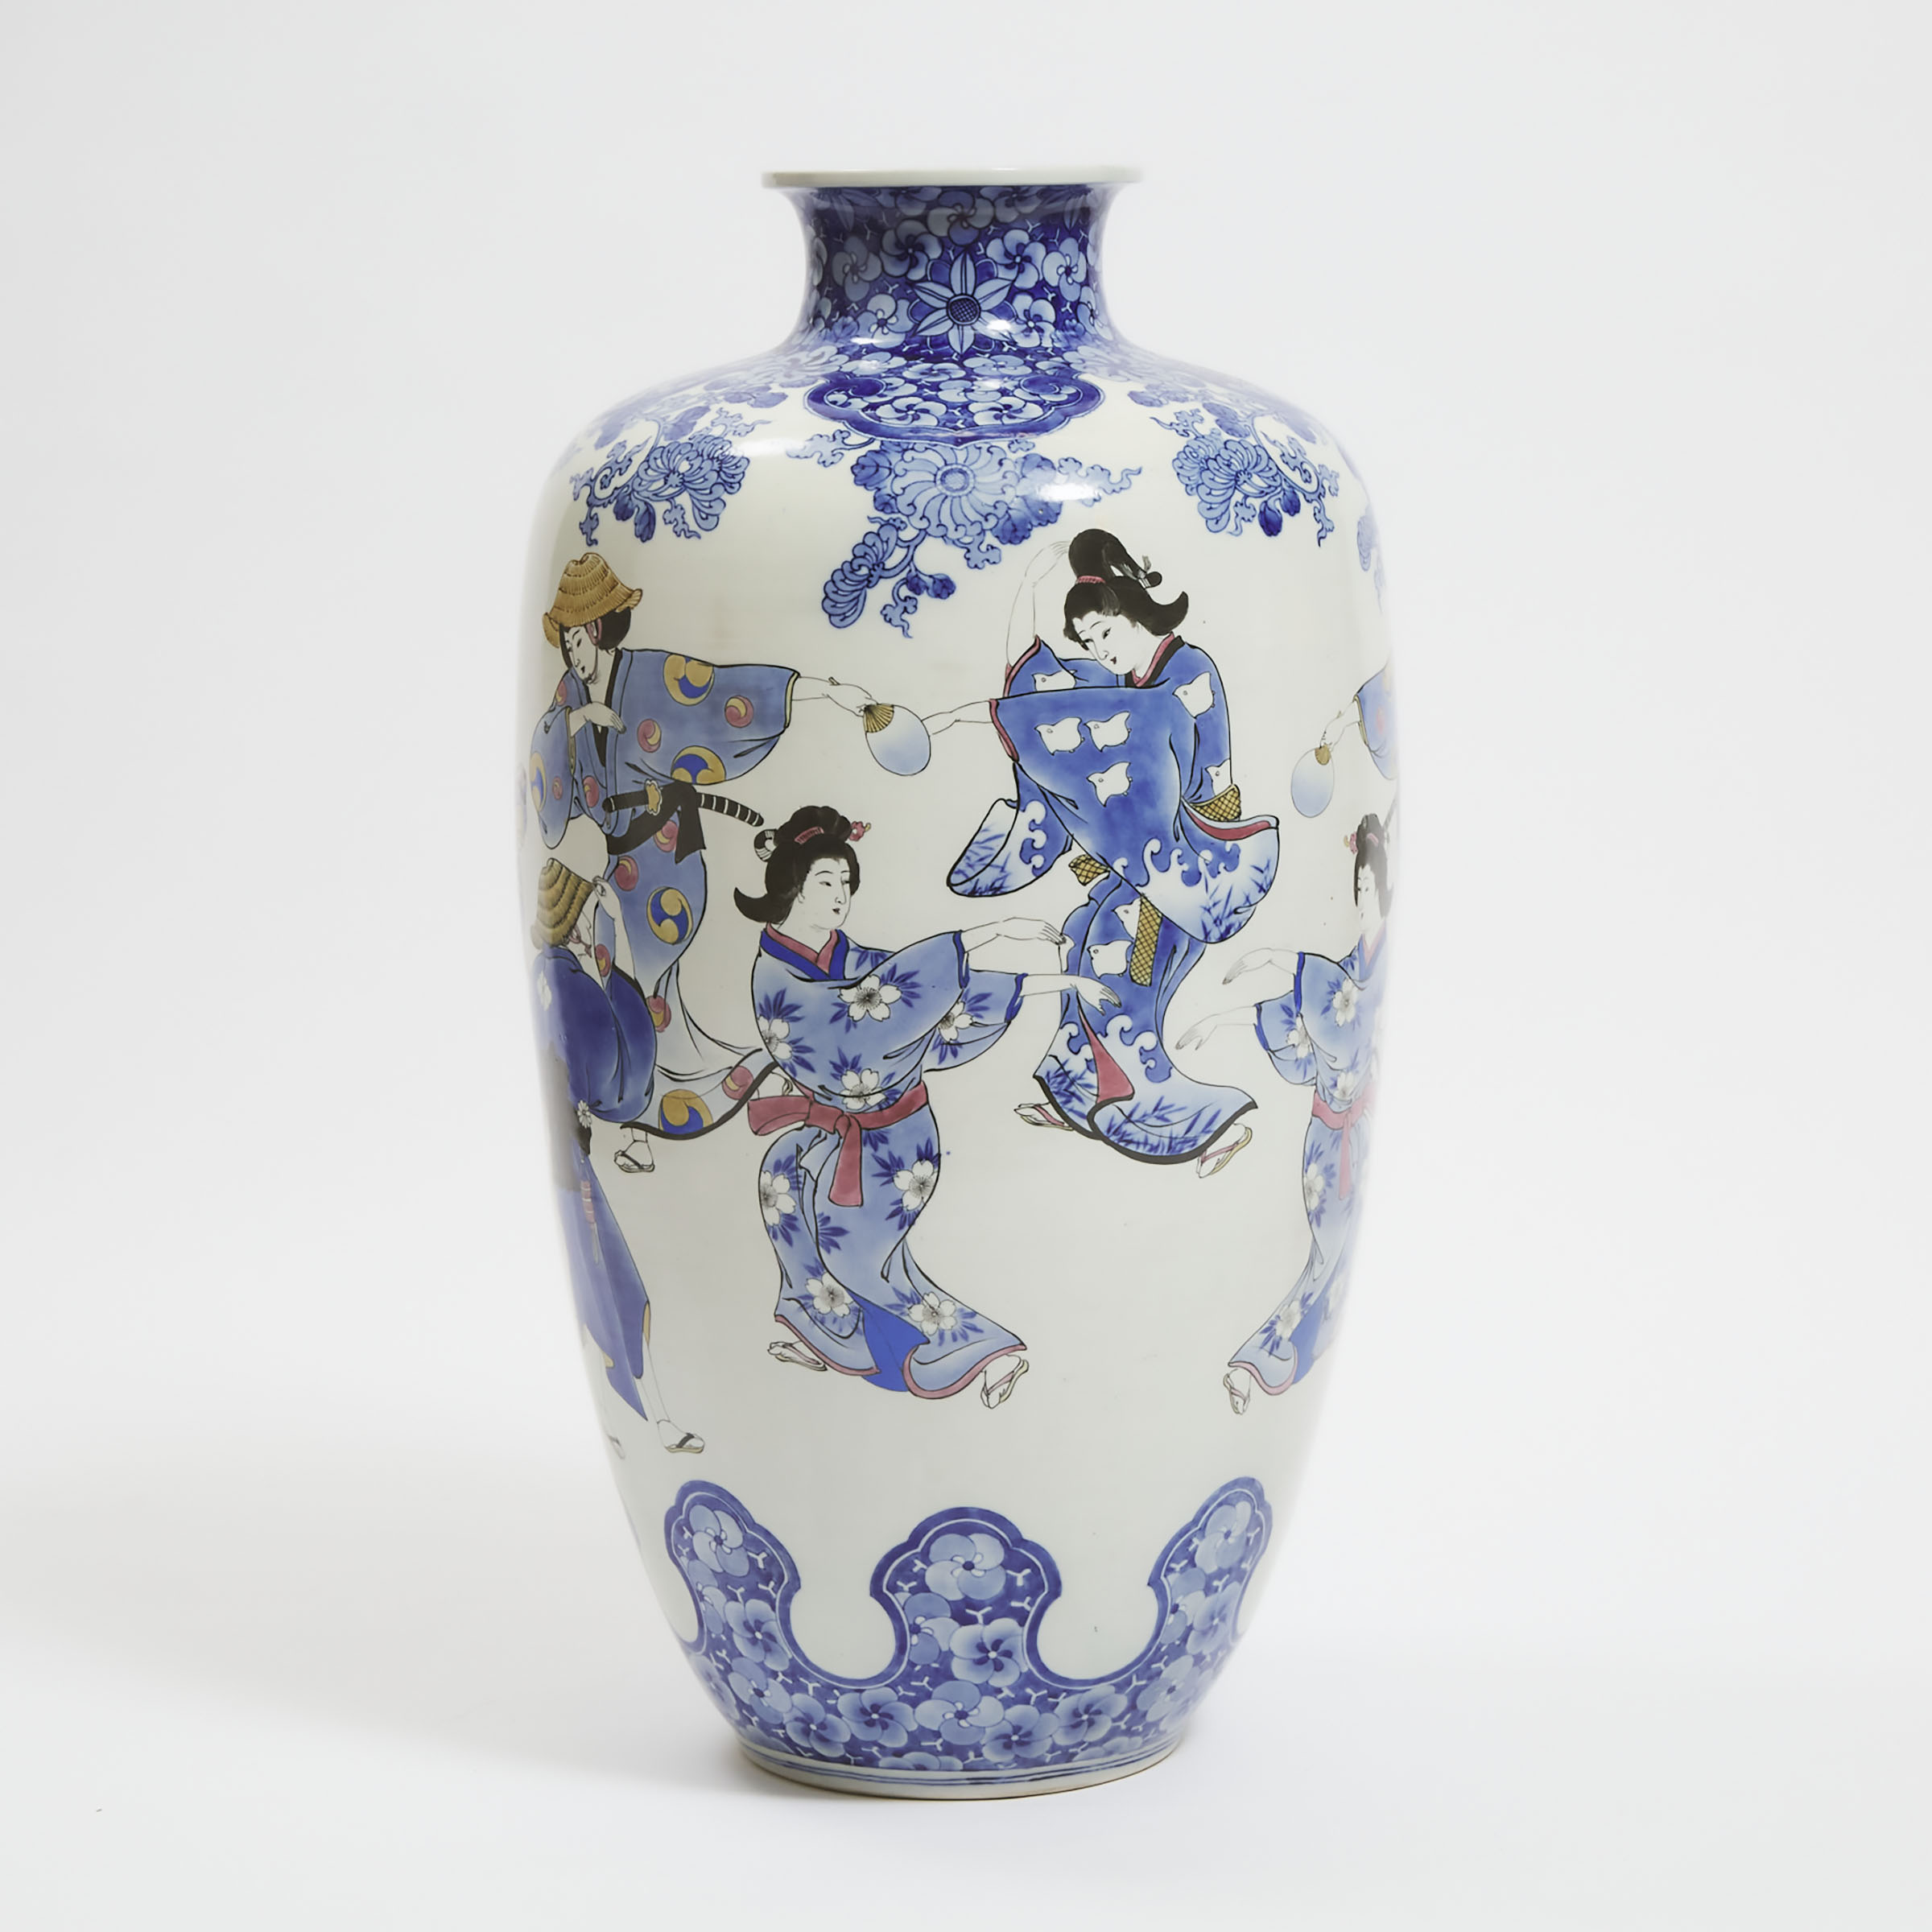 A Massive Japanese Arita Blue and White Vase, Early to Mid 20th Century